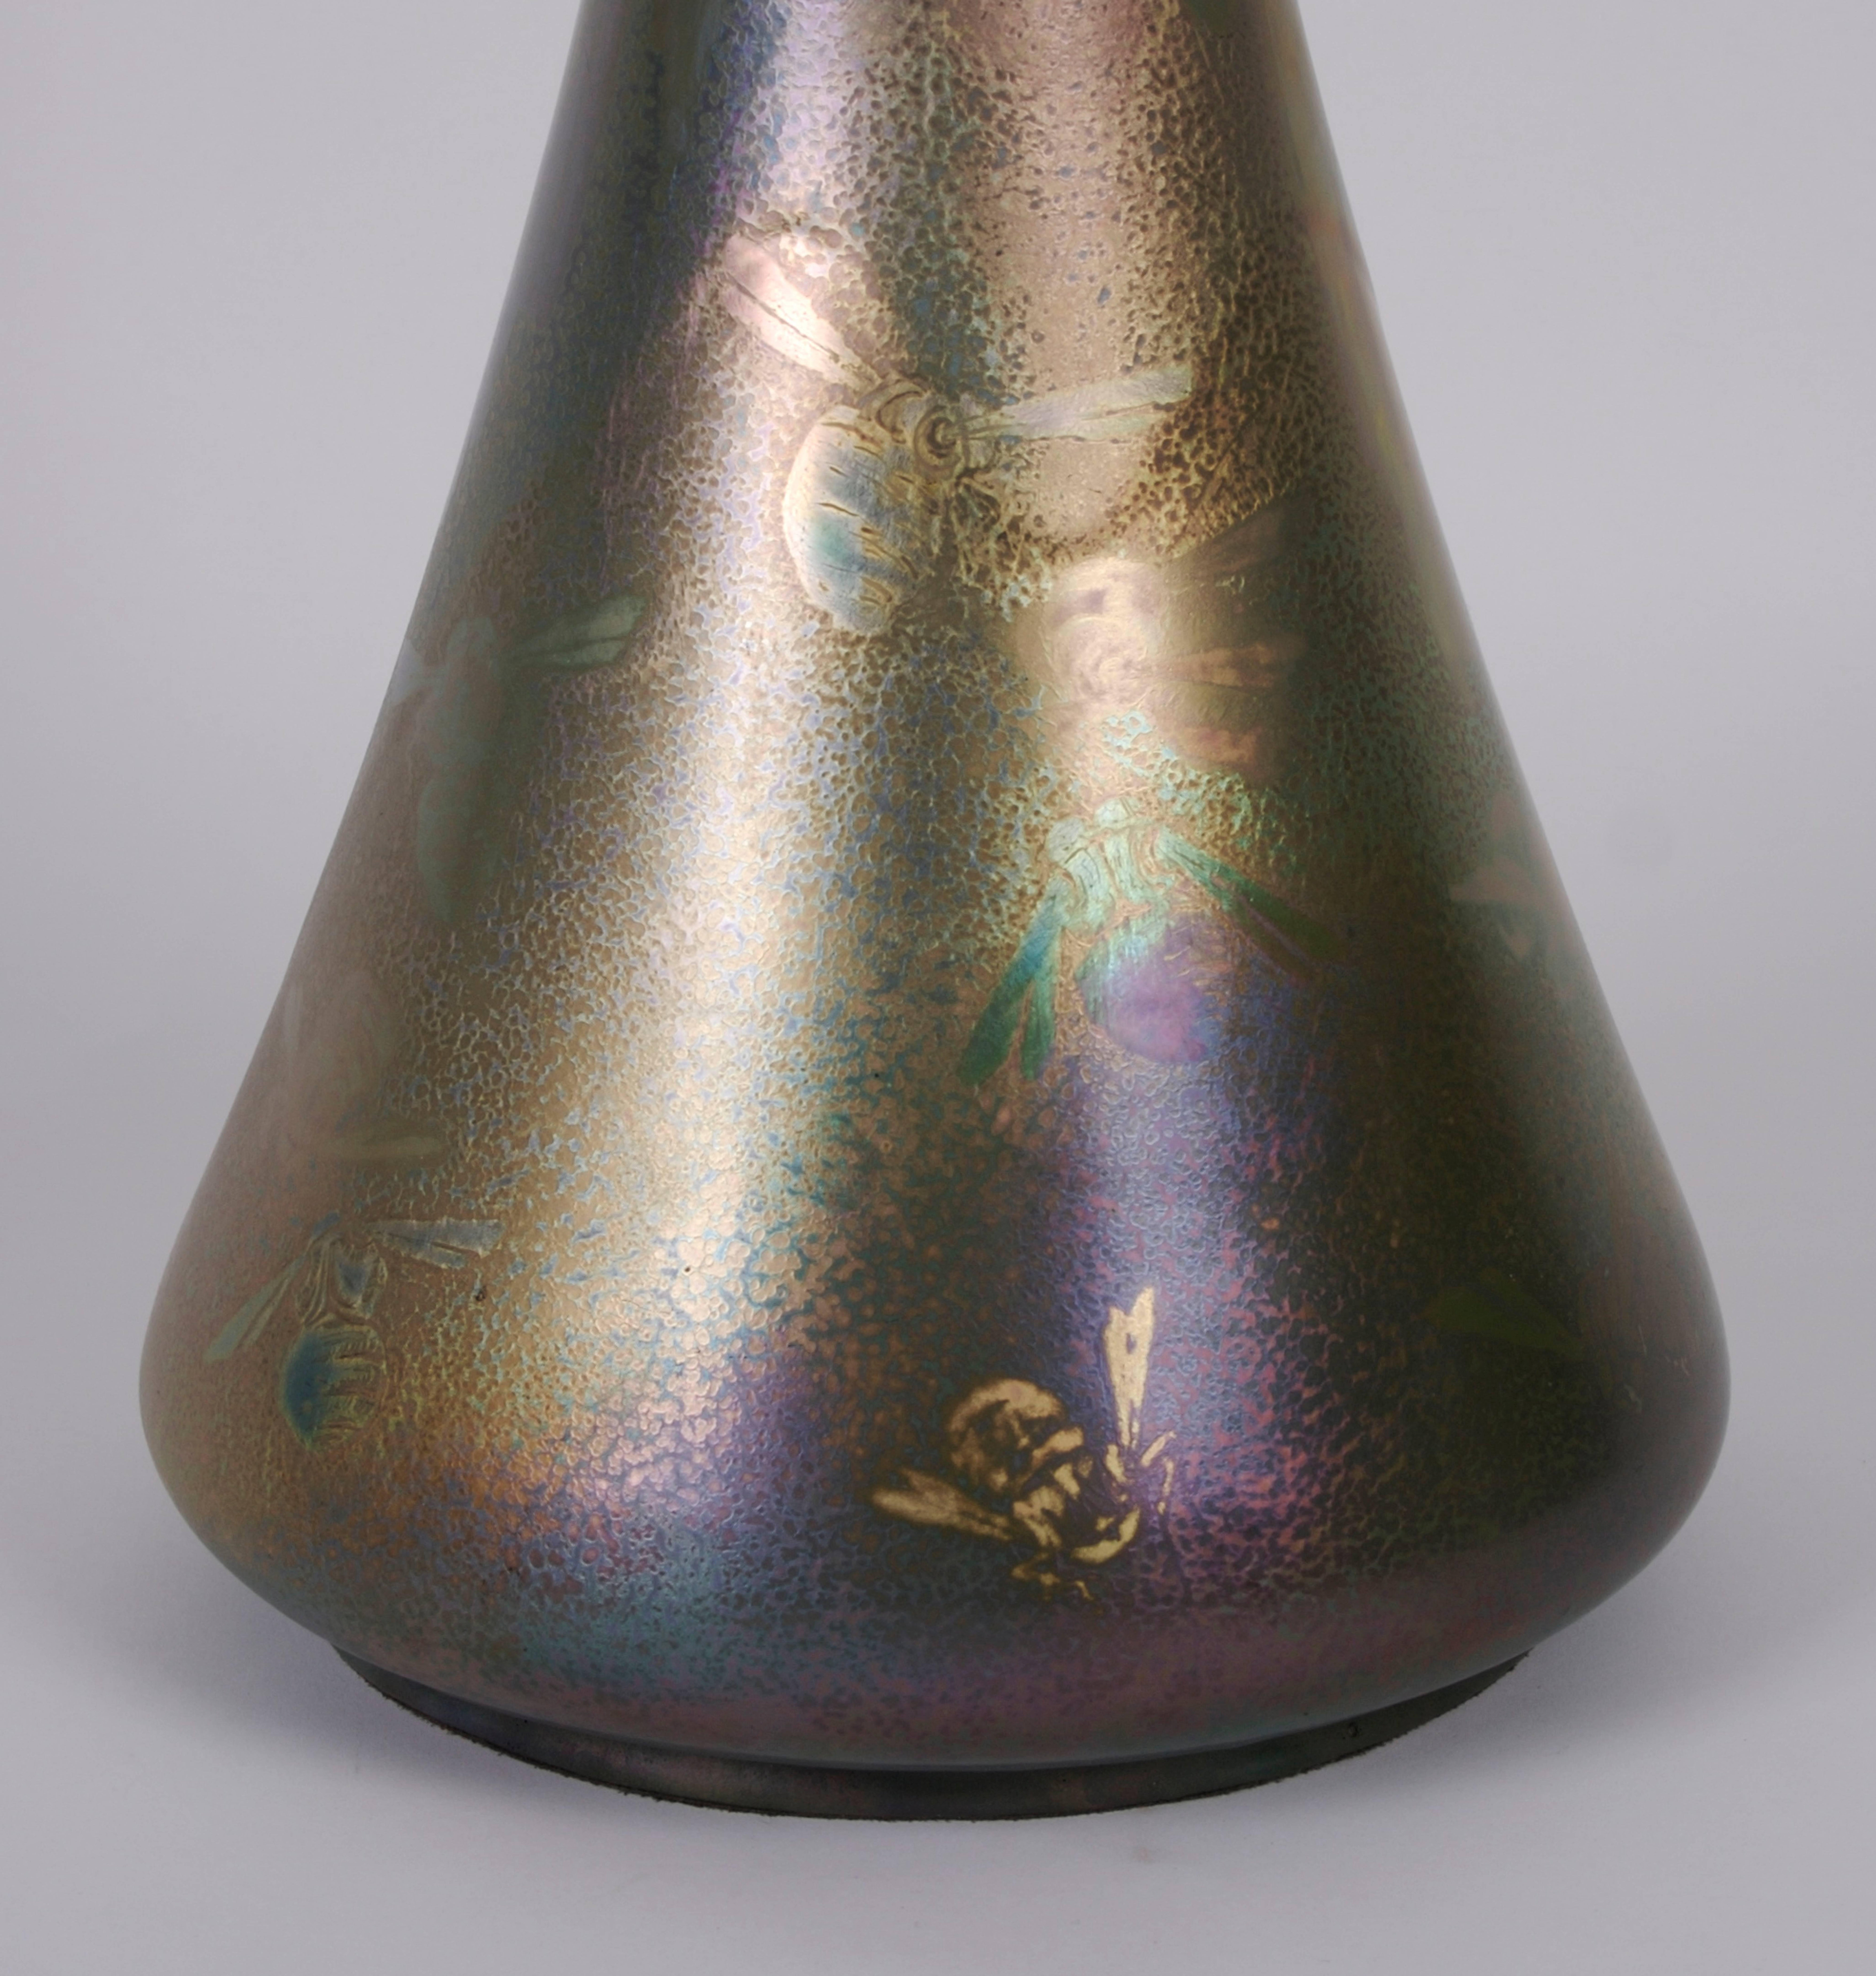 French Art Nouveau period iridescent glaze vase with "honey bee" motif by Clement Massier, circa 1900.

Massier (1845-1917), member of a family dynasty of potters, is credited with reviving the ceramics industry in Vallauris, France.